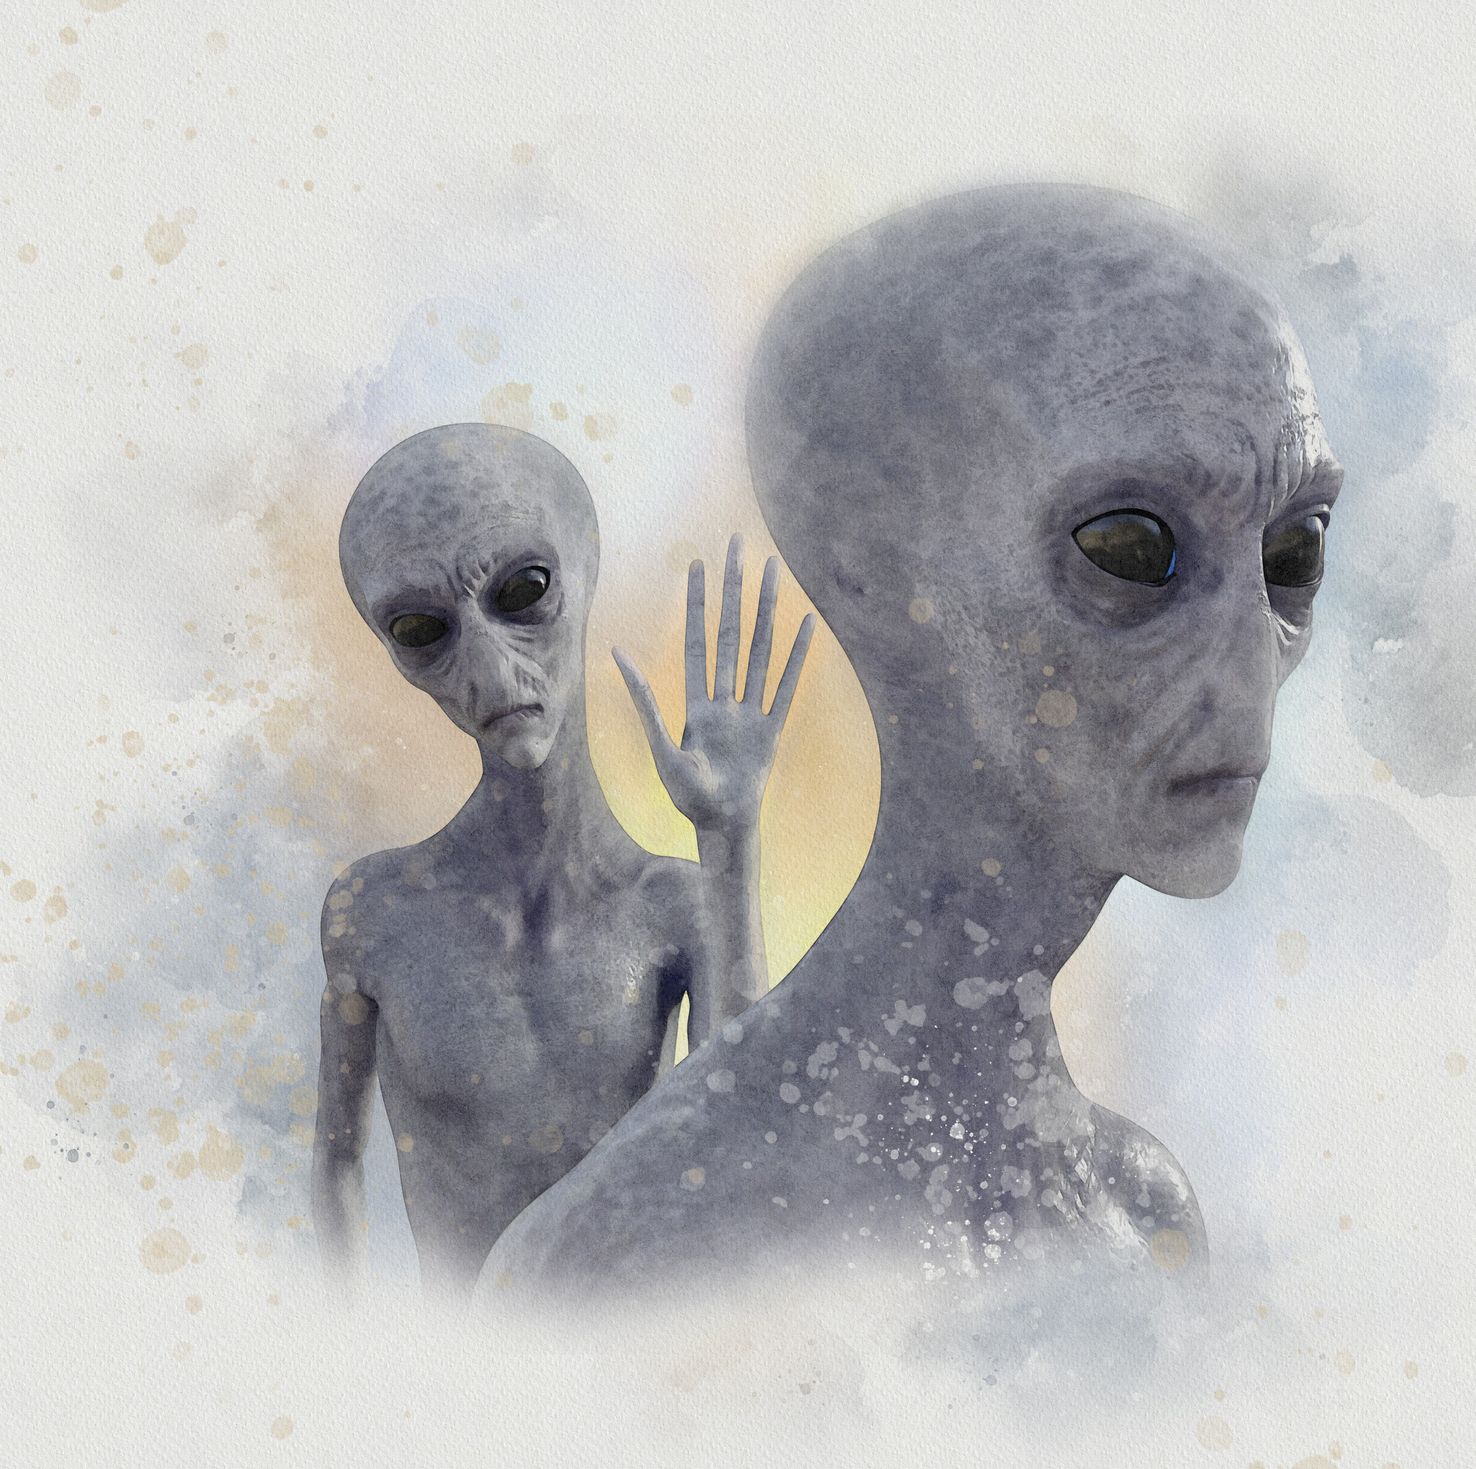 drawings of aliens from planets